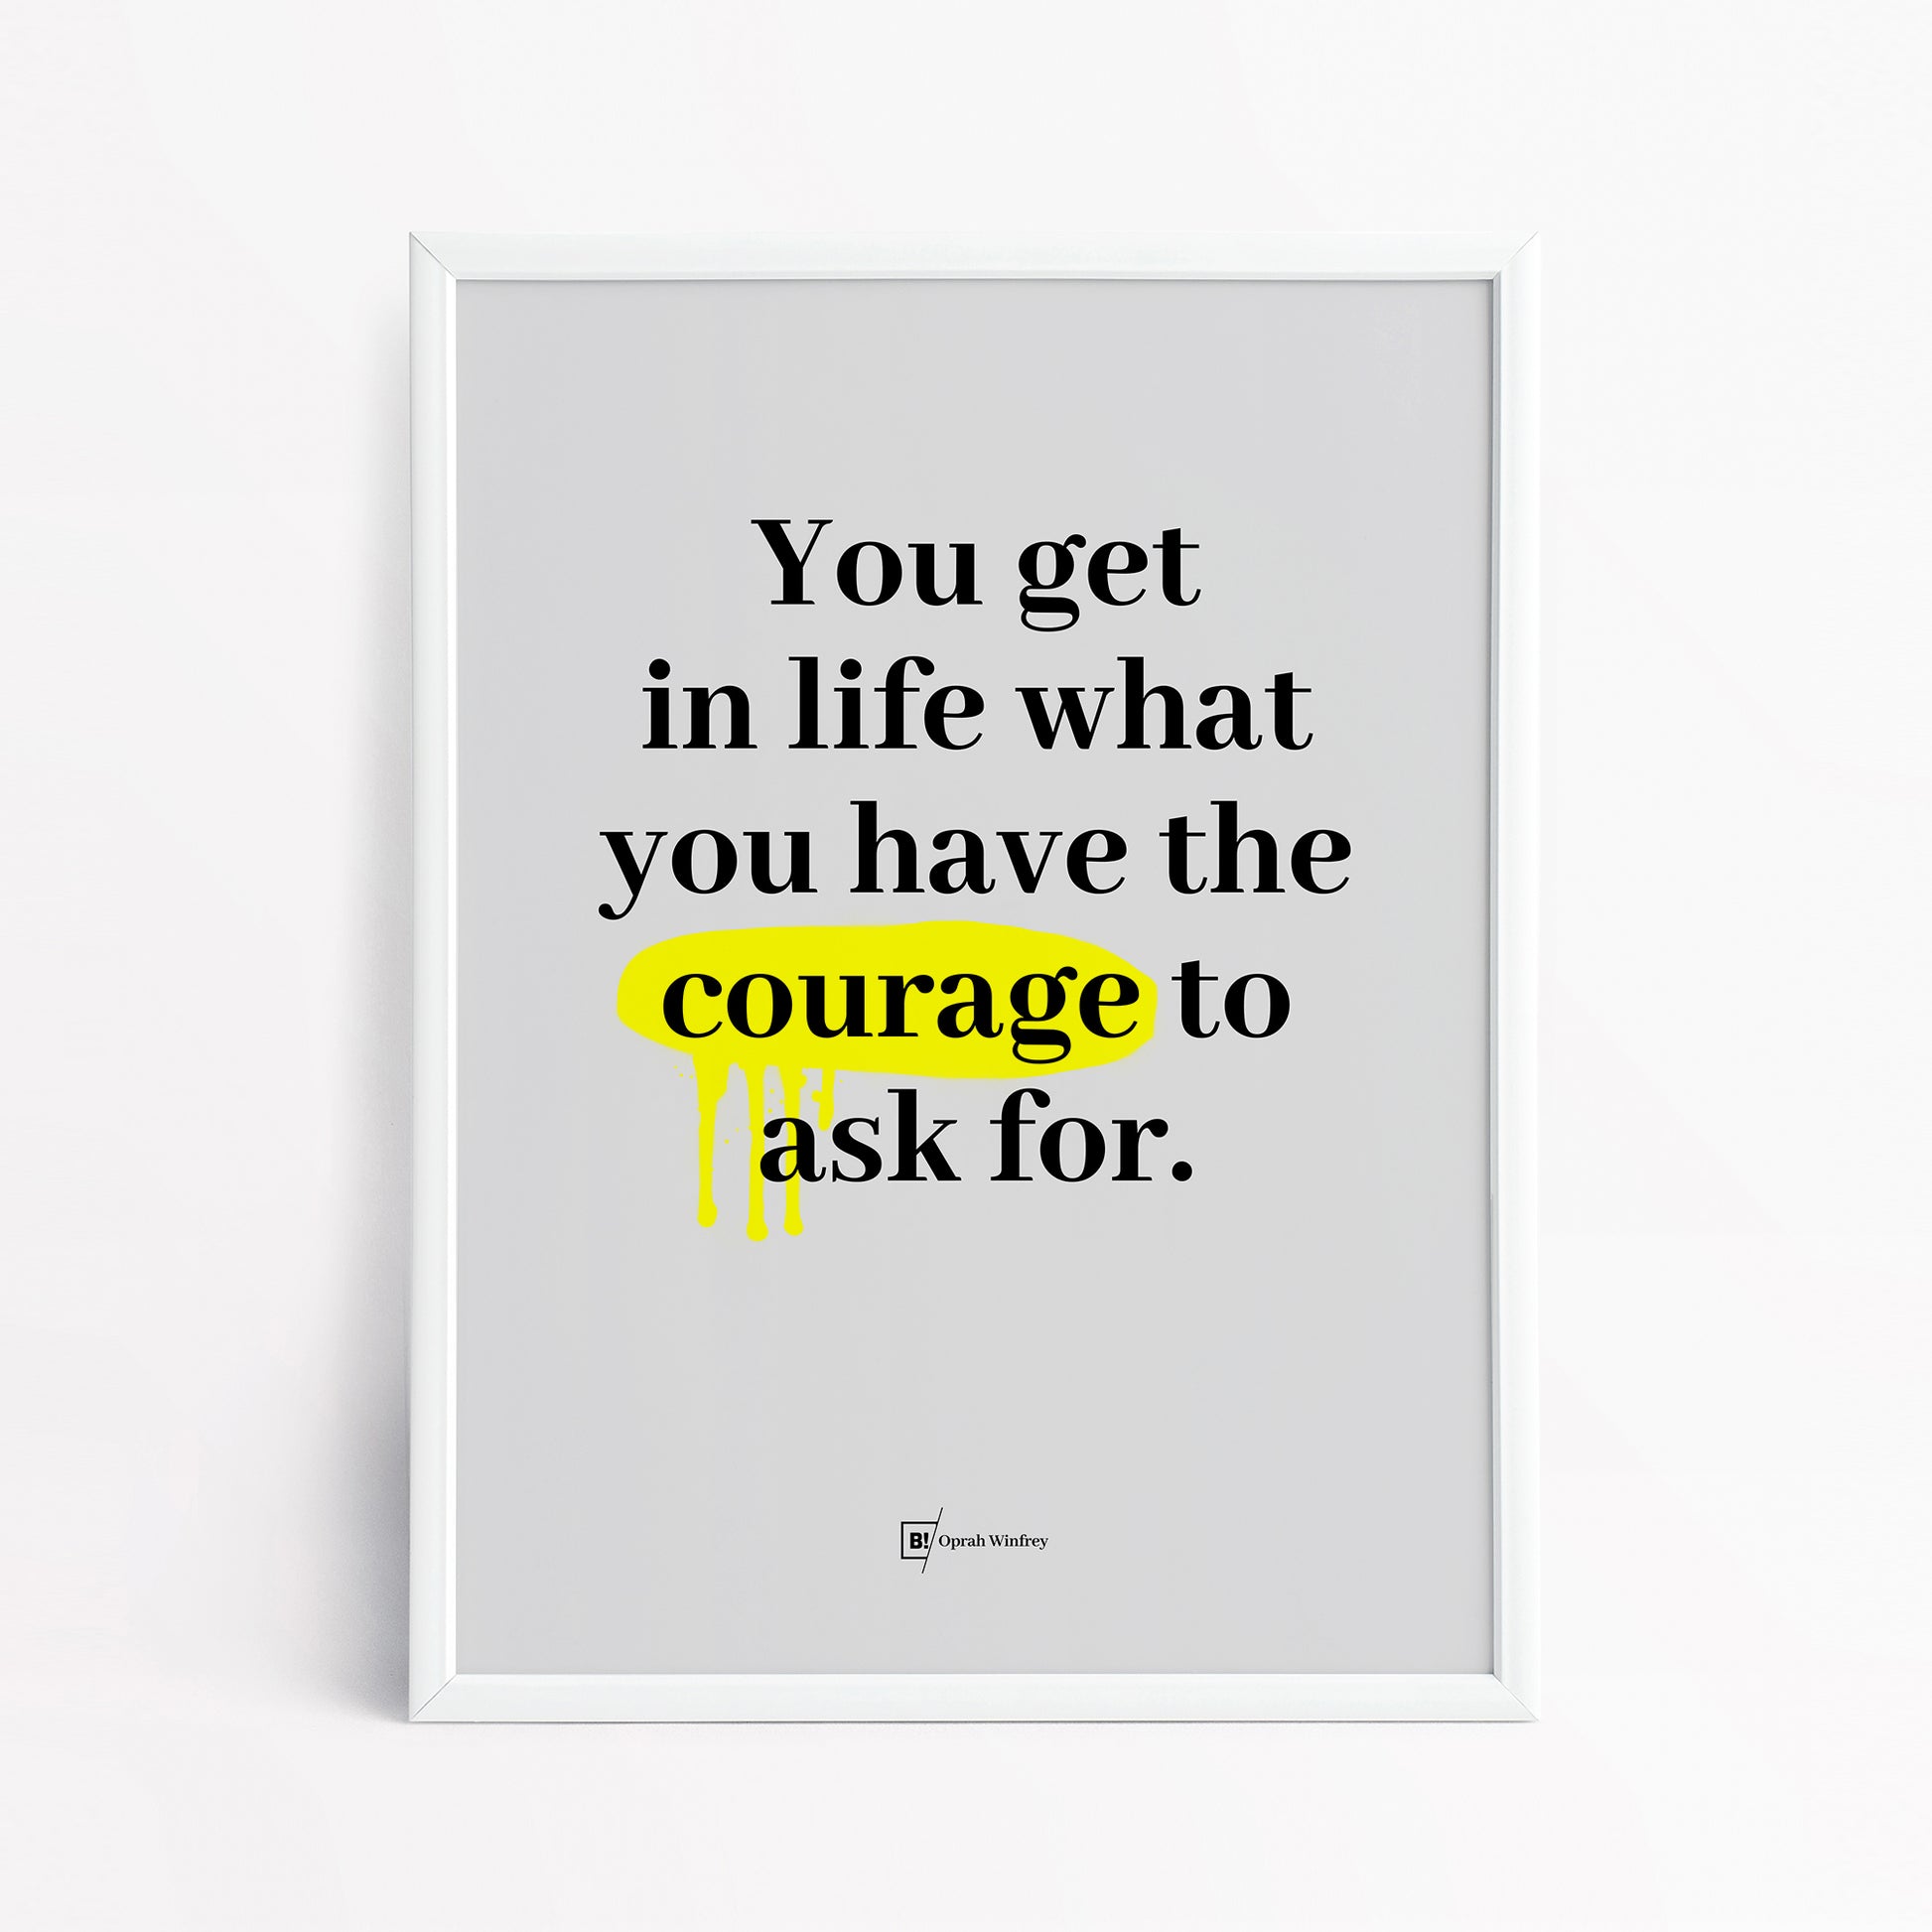 Be inspired by Oprah Winfrey's famous "You get in life what you have the courage to ask for" quote art print. This artwork was printed using the giclée process on archival acid-free paper and is presented in a simple white frame that captures its timeless beauty in every detail.